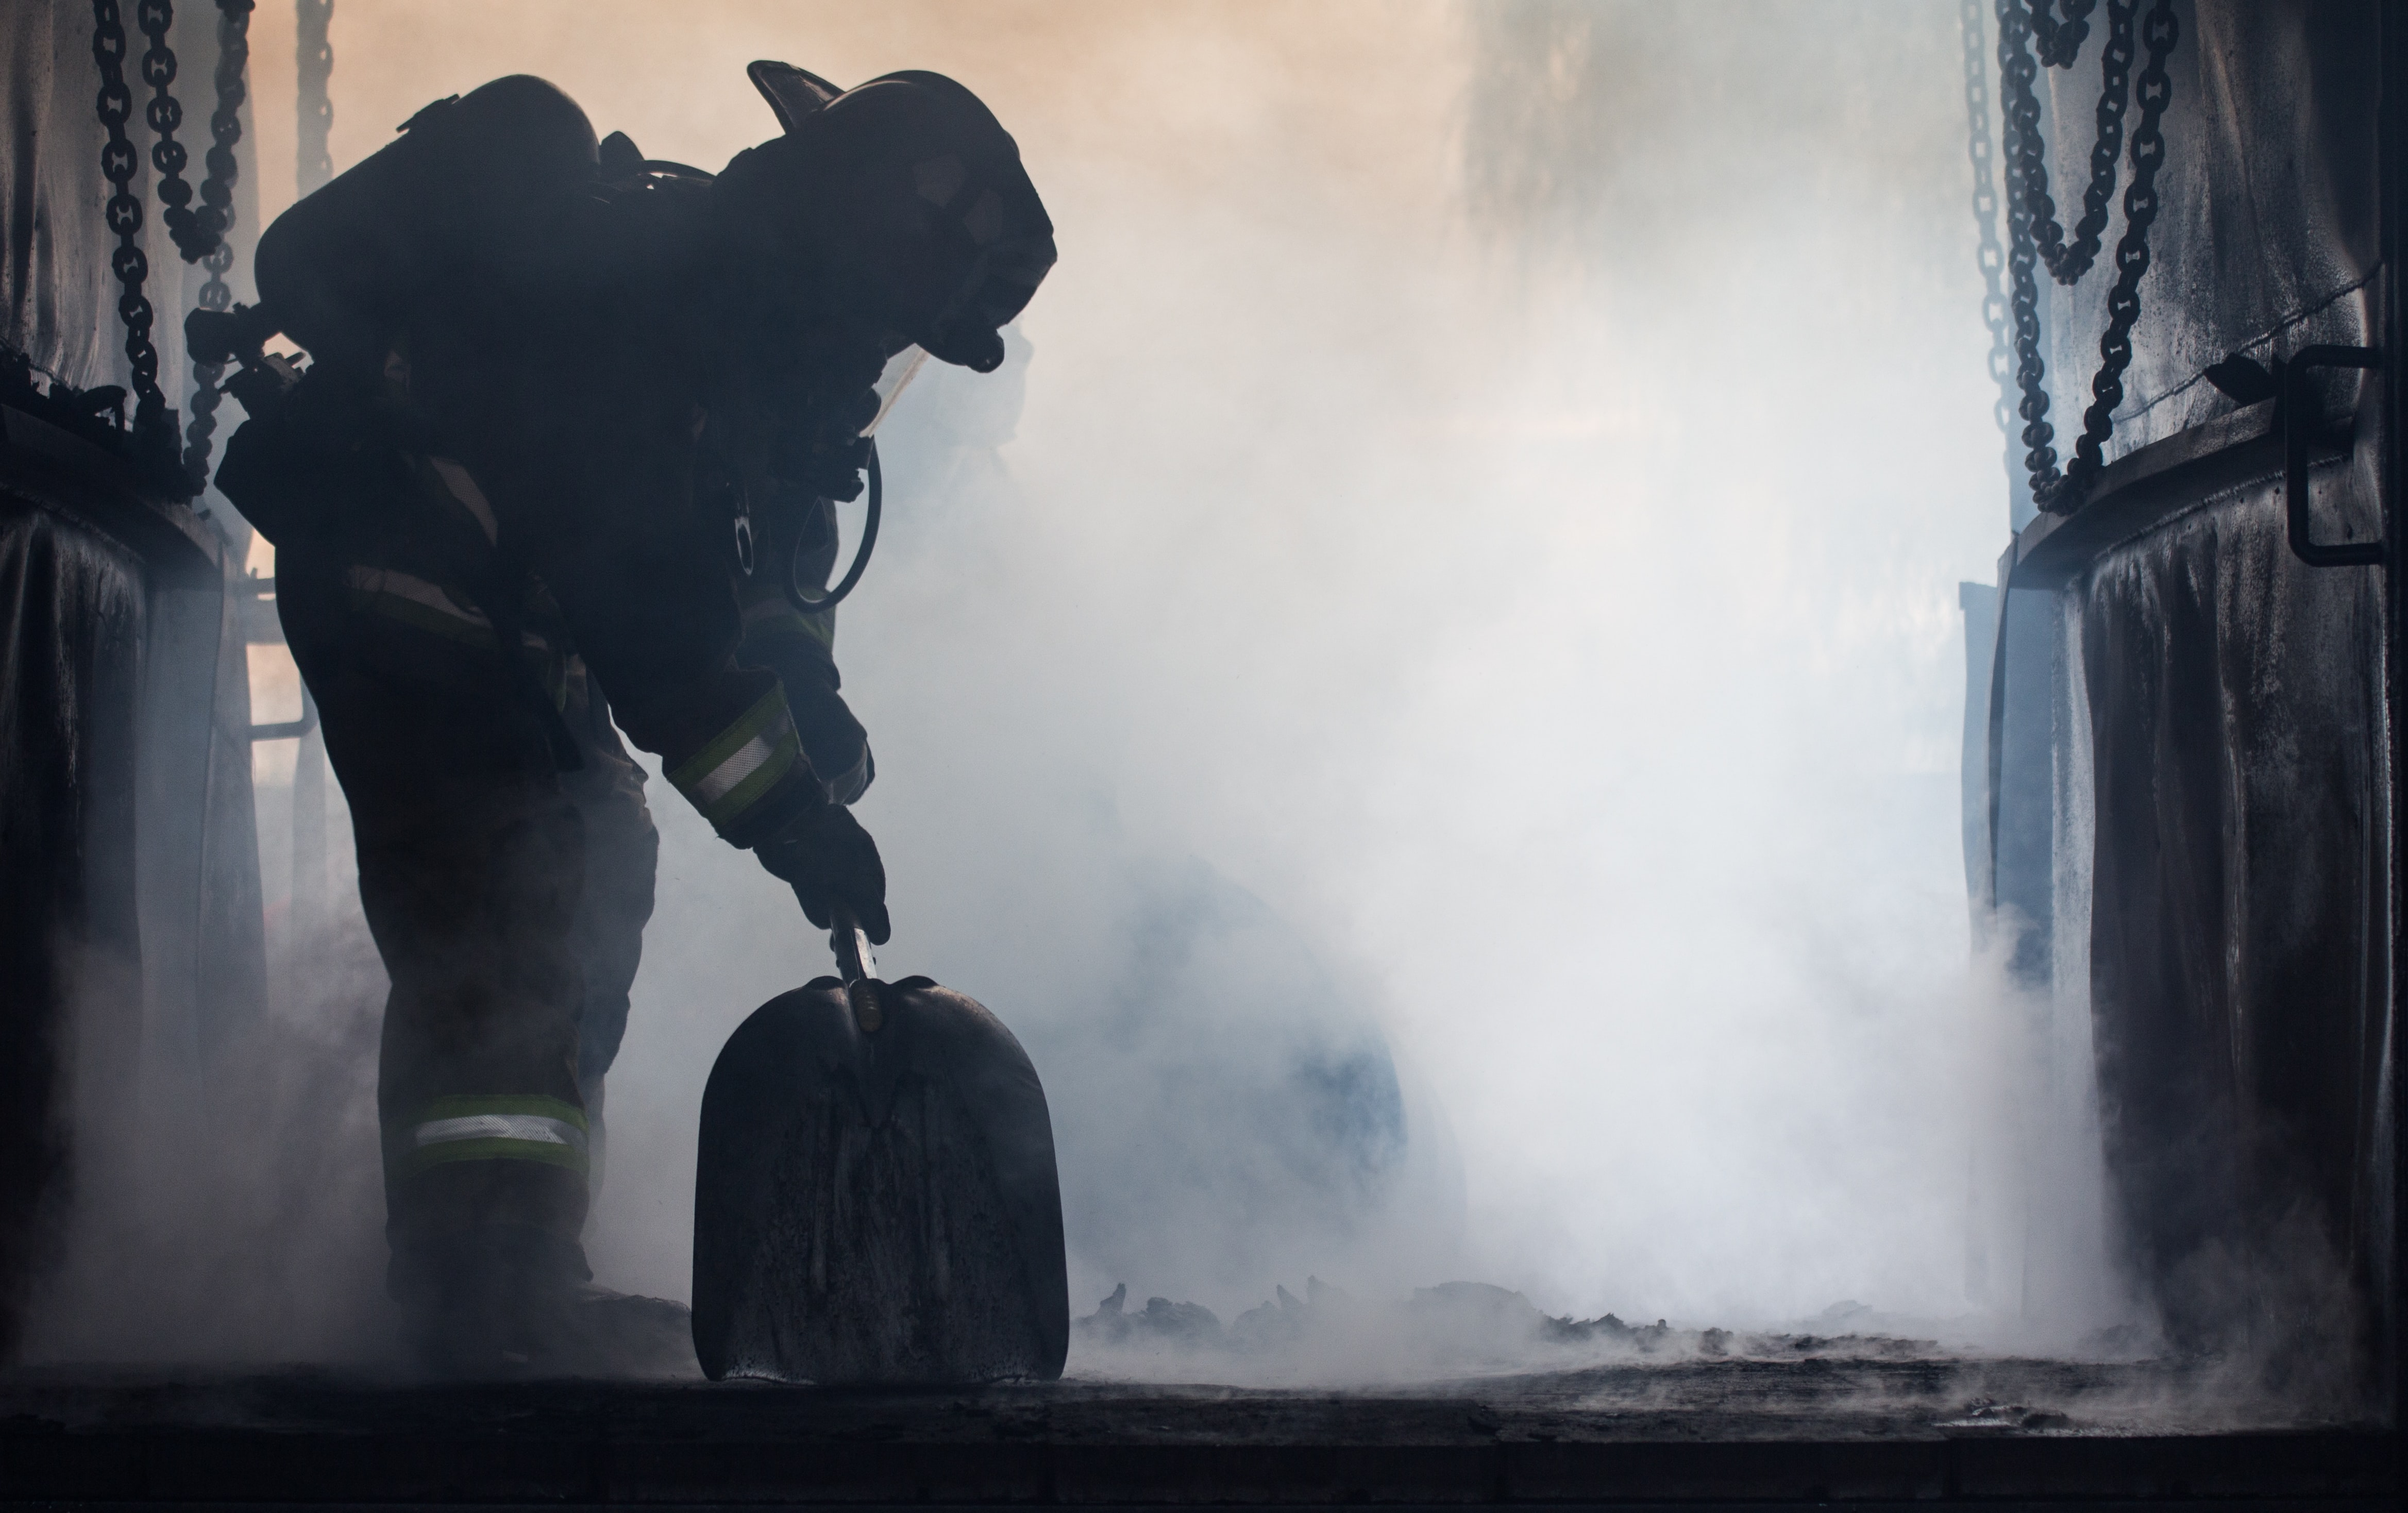 Firefighter during an intervention in the smoke